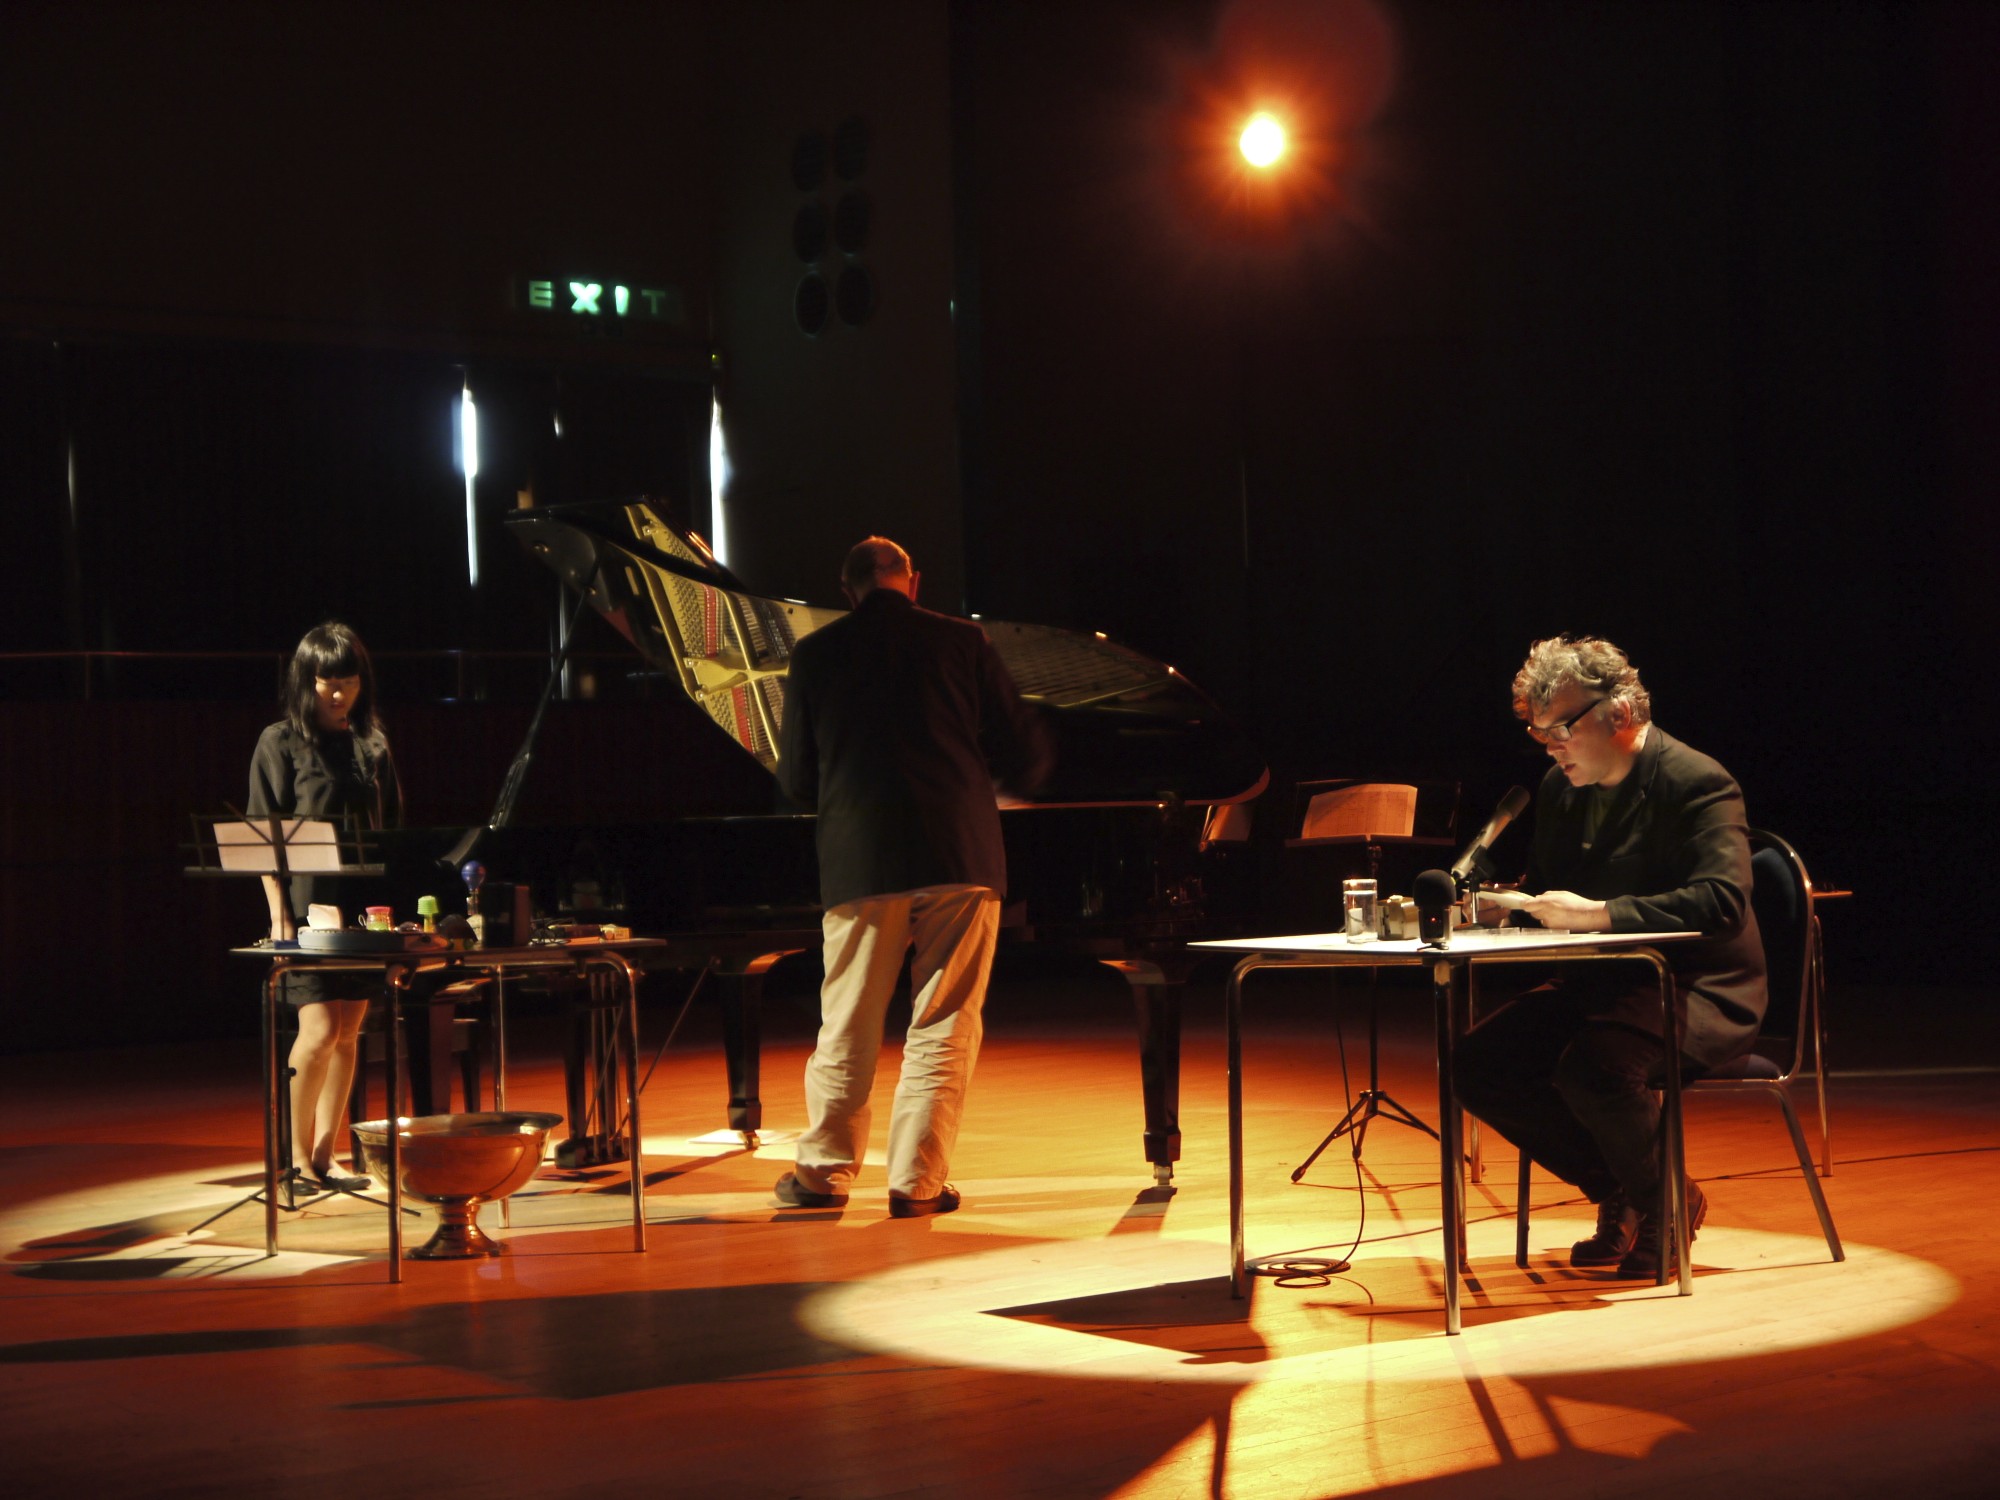 De La Warr Pavilion, 2011, performing John Cage's Indeterminacy with Steve Beresford and Stewart Lee